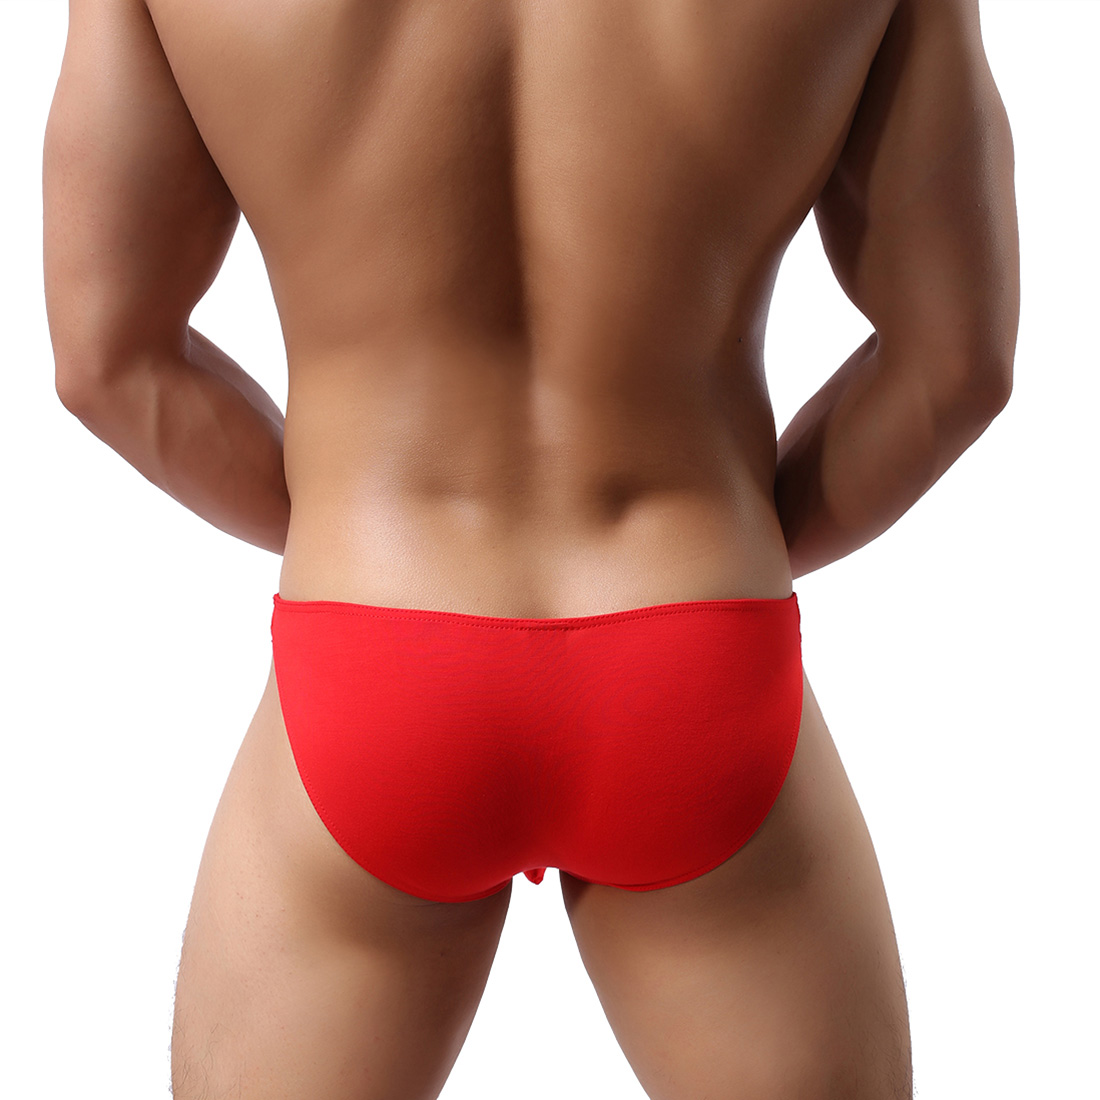 Men's Sexy Lingerie Underwear Modal Triangle Pants Shorts with Penis Sheath WH8 Red L